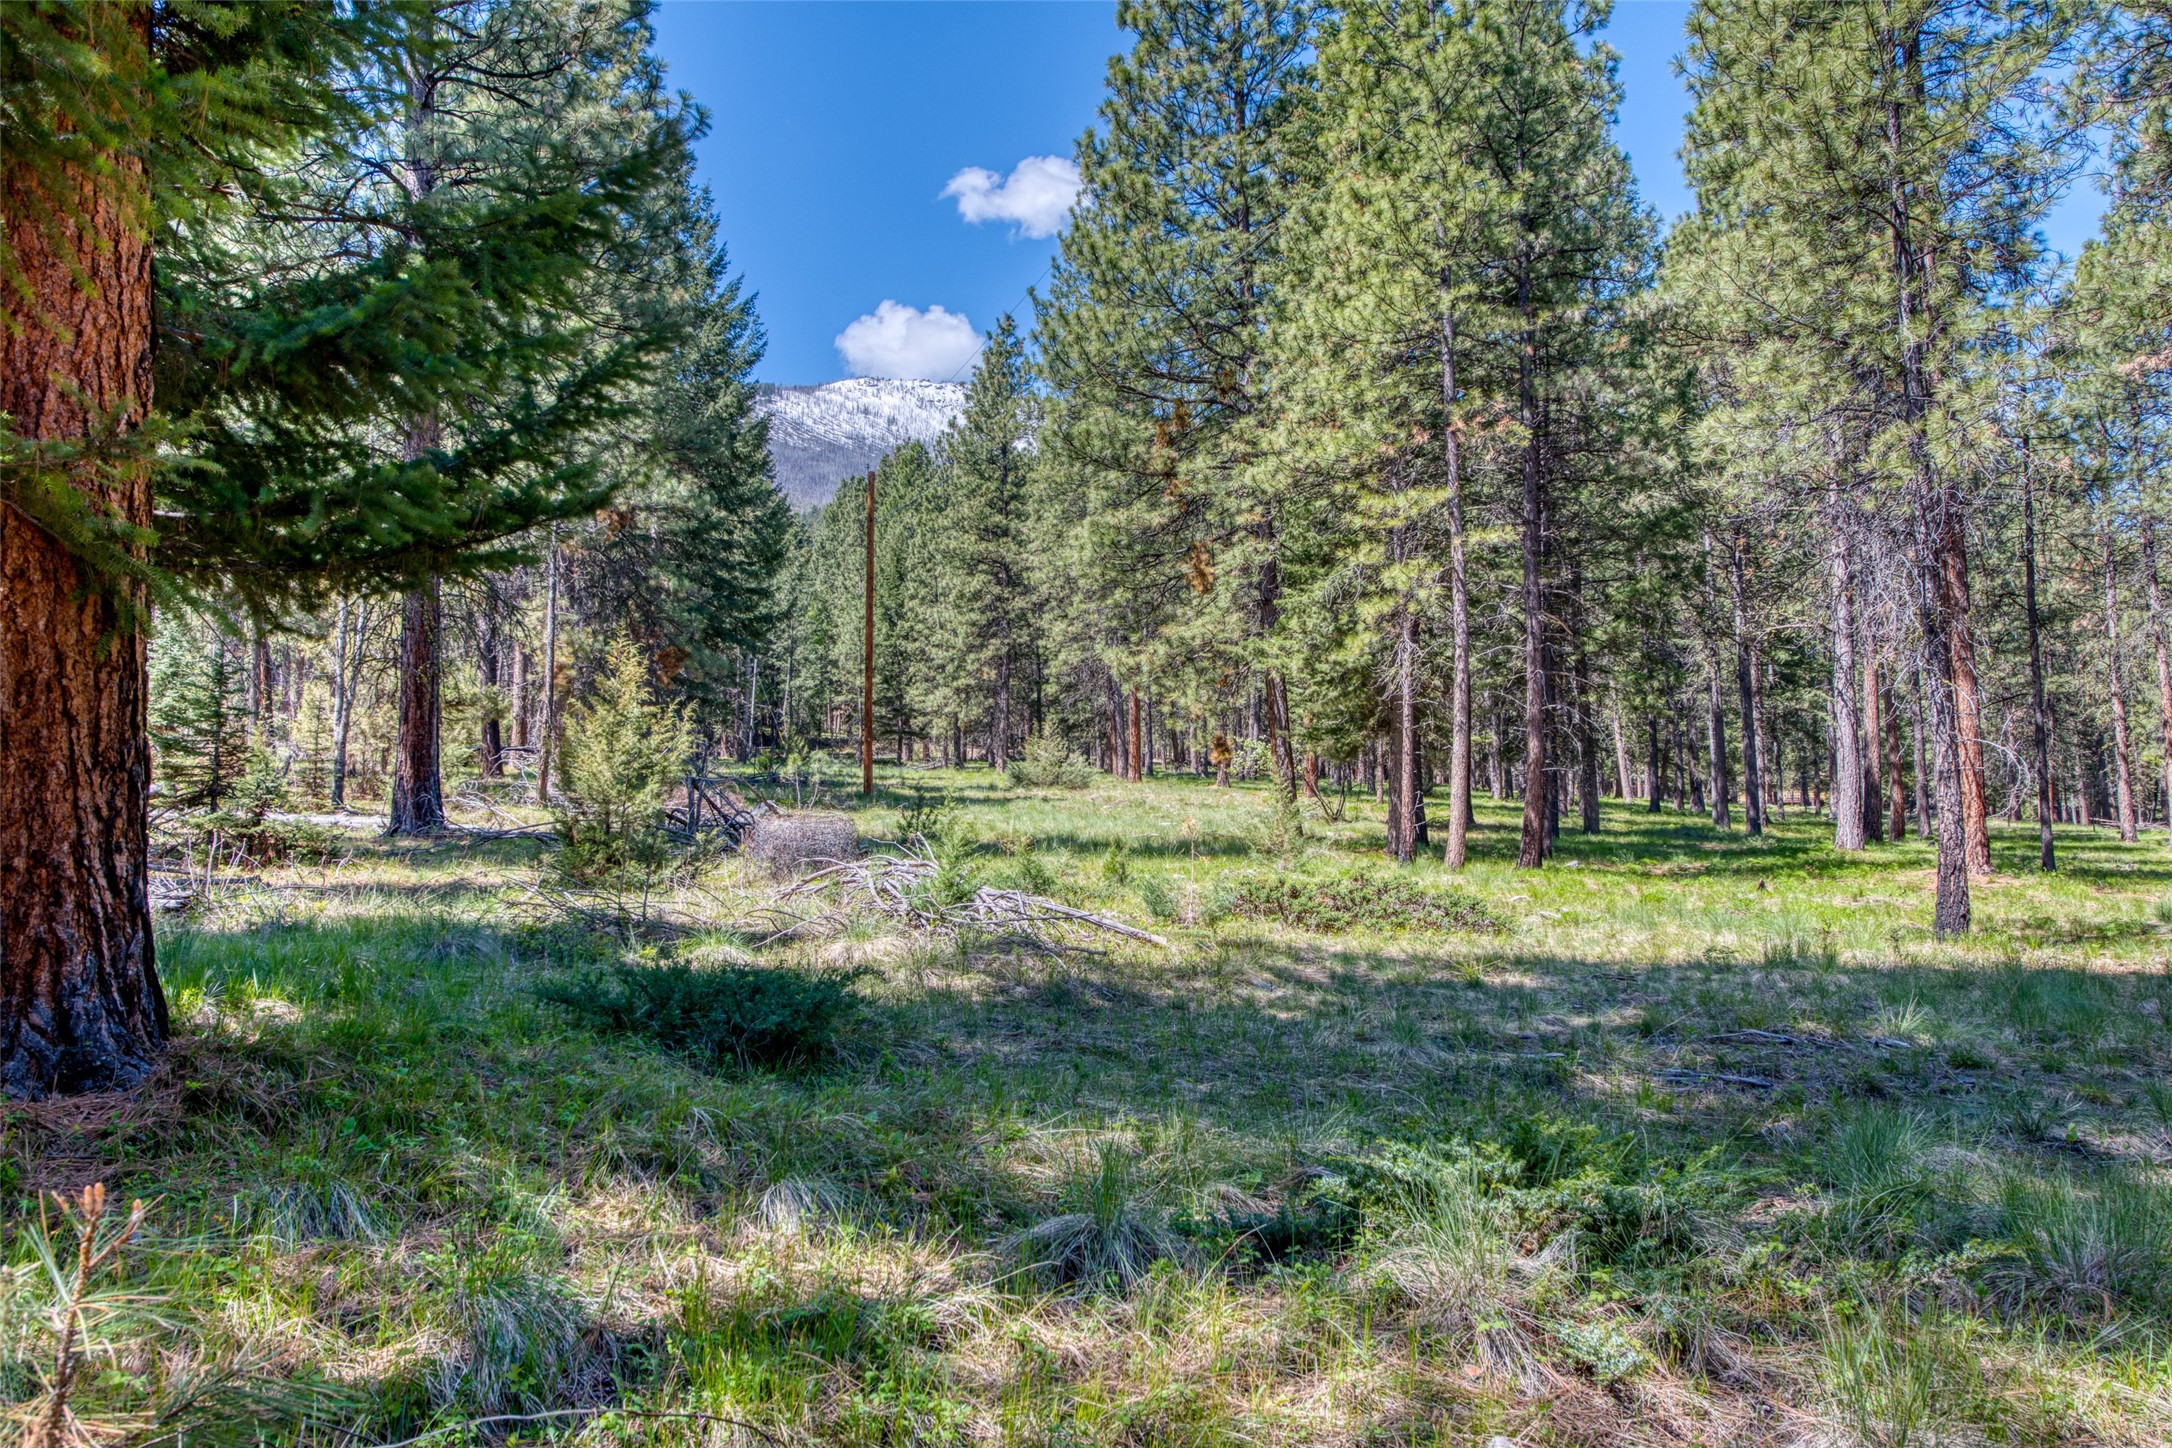 A rare chance to own 10 acres of West side Bitterroot land. Less than ten minutes to town and accessible year round, this property sits along a private road. The acreage is gently sloping with large ponderosa pines, native wildflowers and abundant wildlife. In the north west corner is a charming homestead cabin as a fun project or just appreciate it's history. These parcels, so close to Hamilton are a rare find! Build your own Montana dream home! *This is not a drive by property. Very private road. Please contact listing agent, Claire Kemp 406-531-7909 or your real estate professional of your choice for a showing. Seller is licensed real estate agent in the state of Montana.